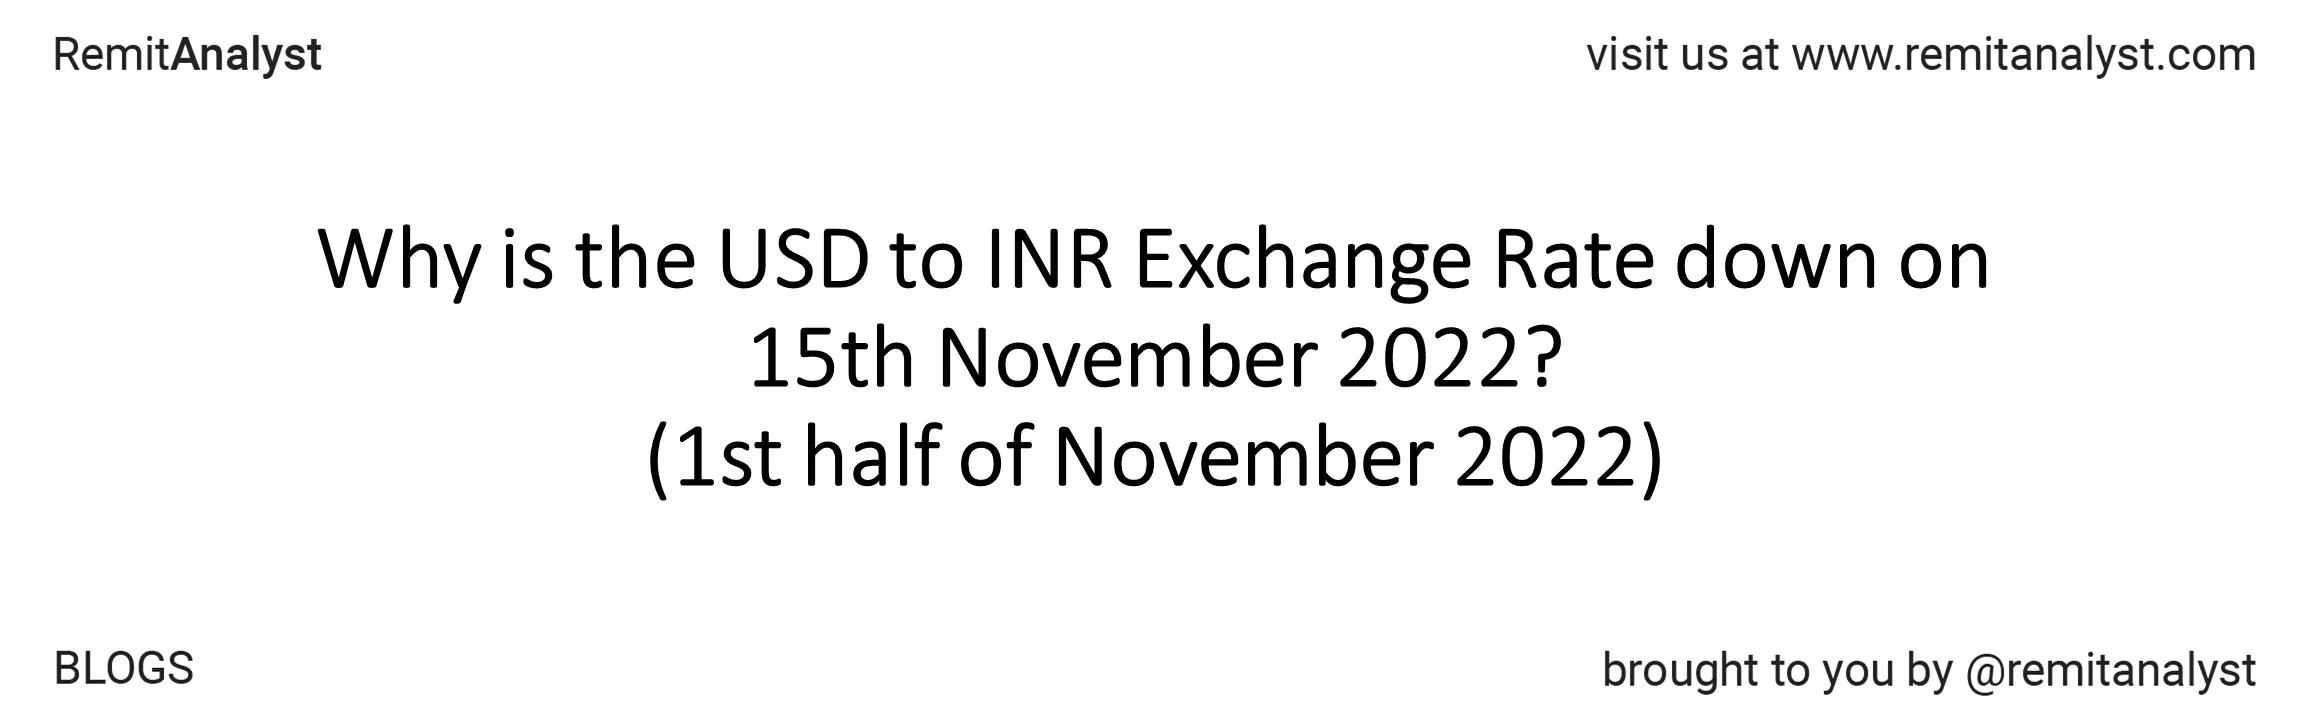 usd-to-inr-exchange-rate-1-nov-2022-to-15-nov-2022-title